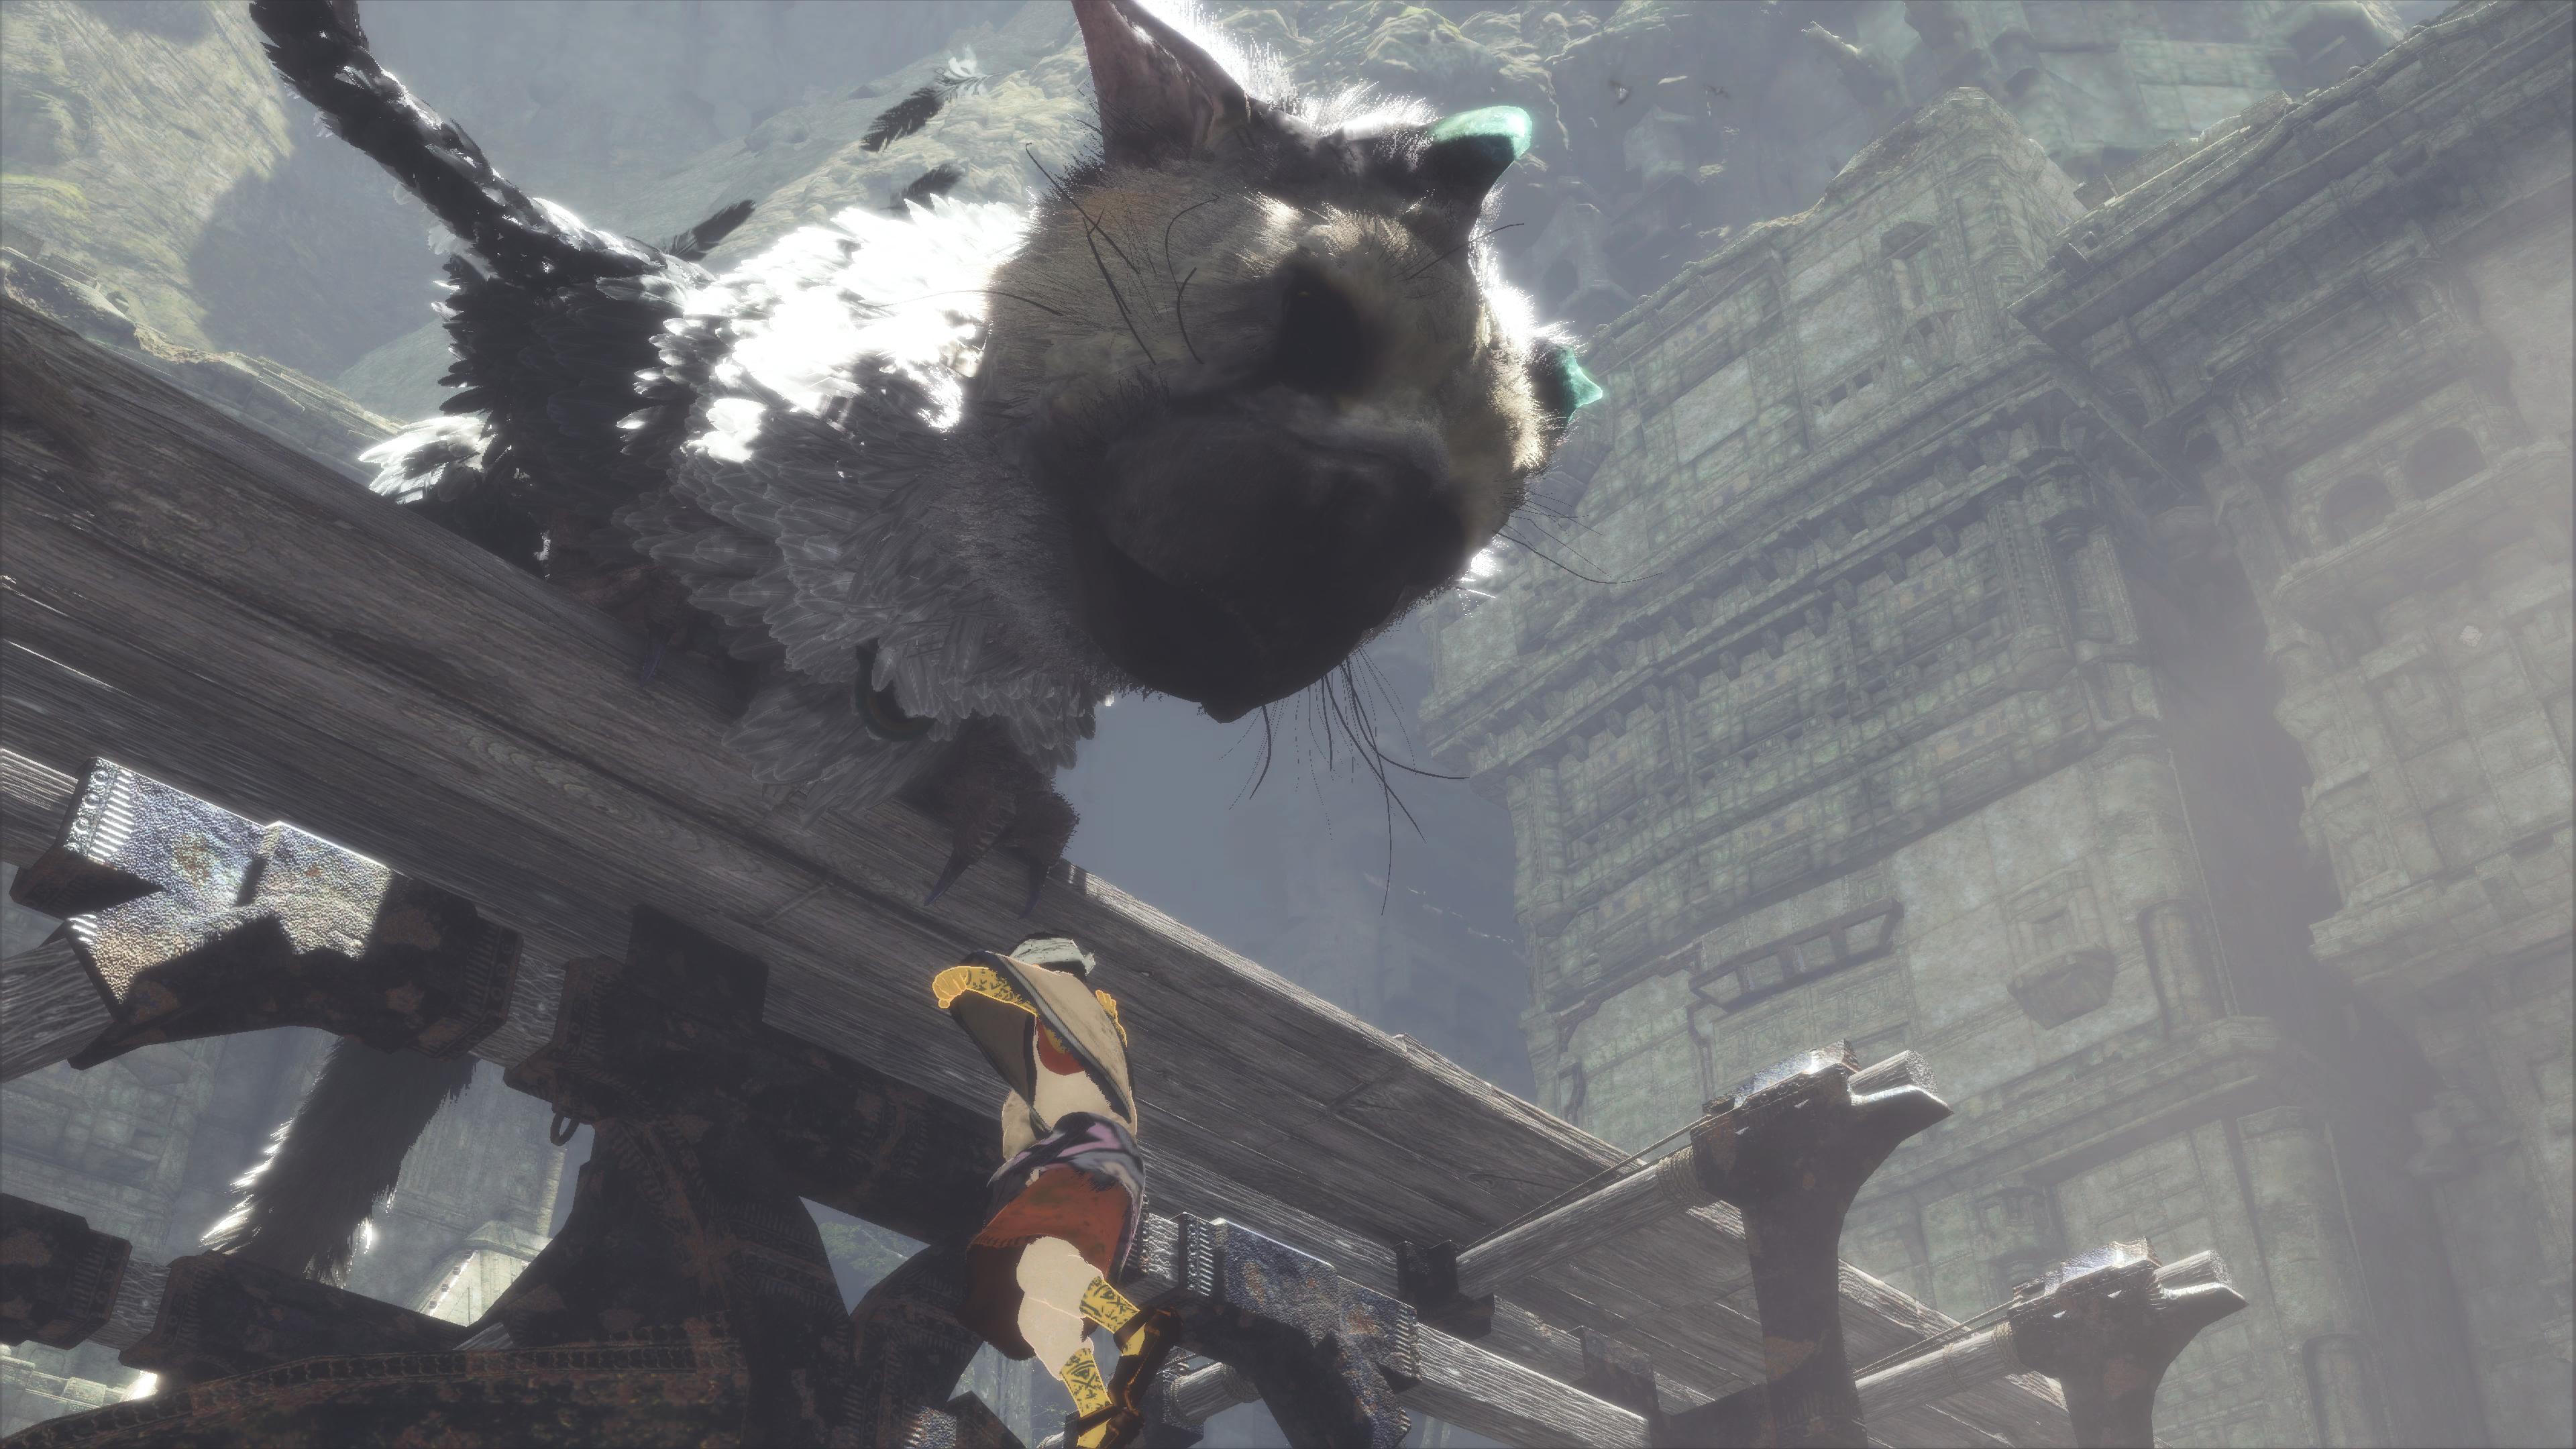 Trico trying to save boy